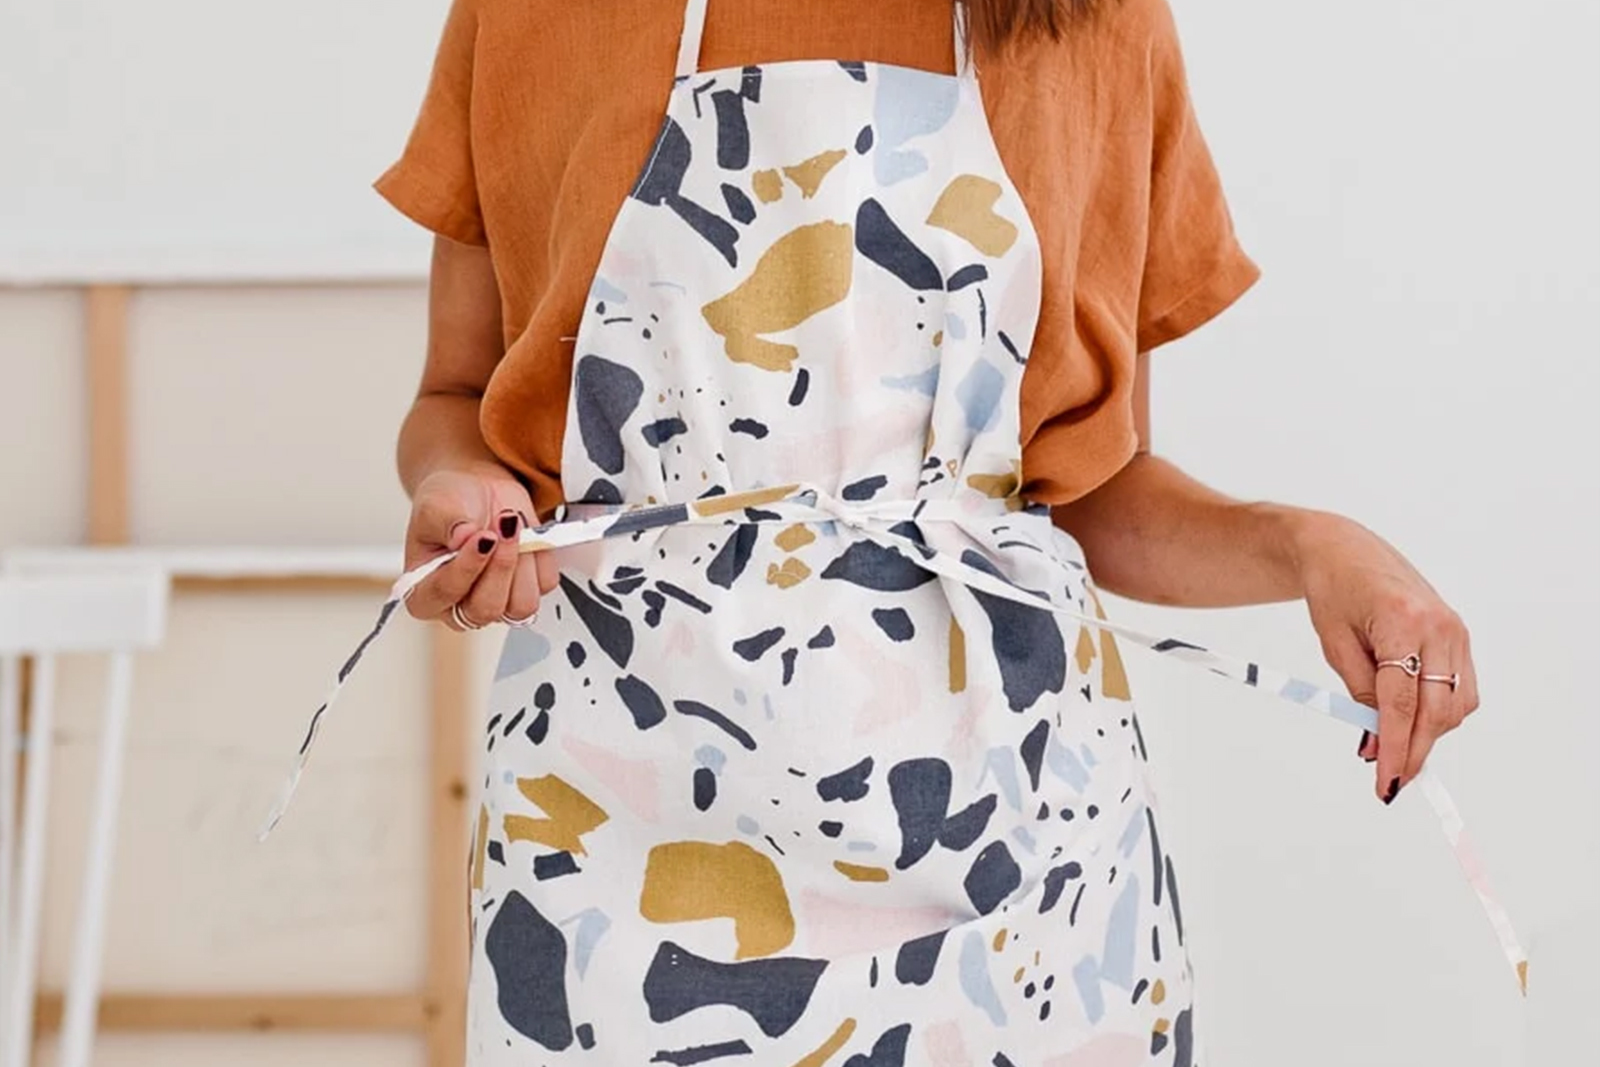 A stock photo of a person wearing a simple kitchen apron